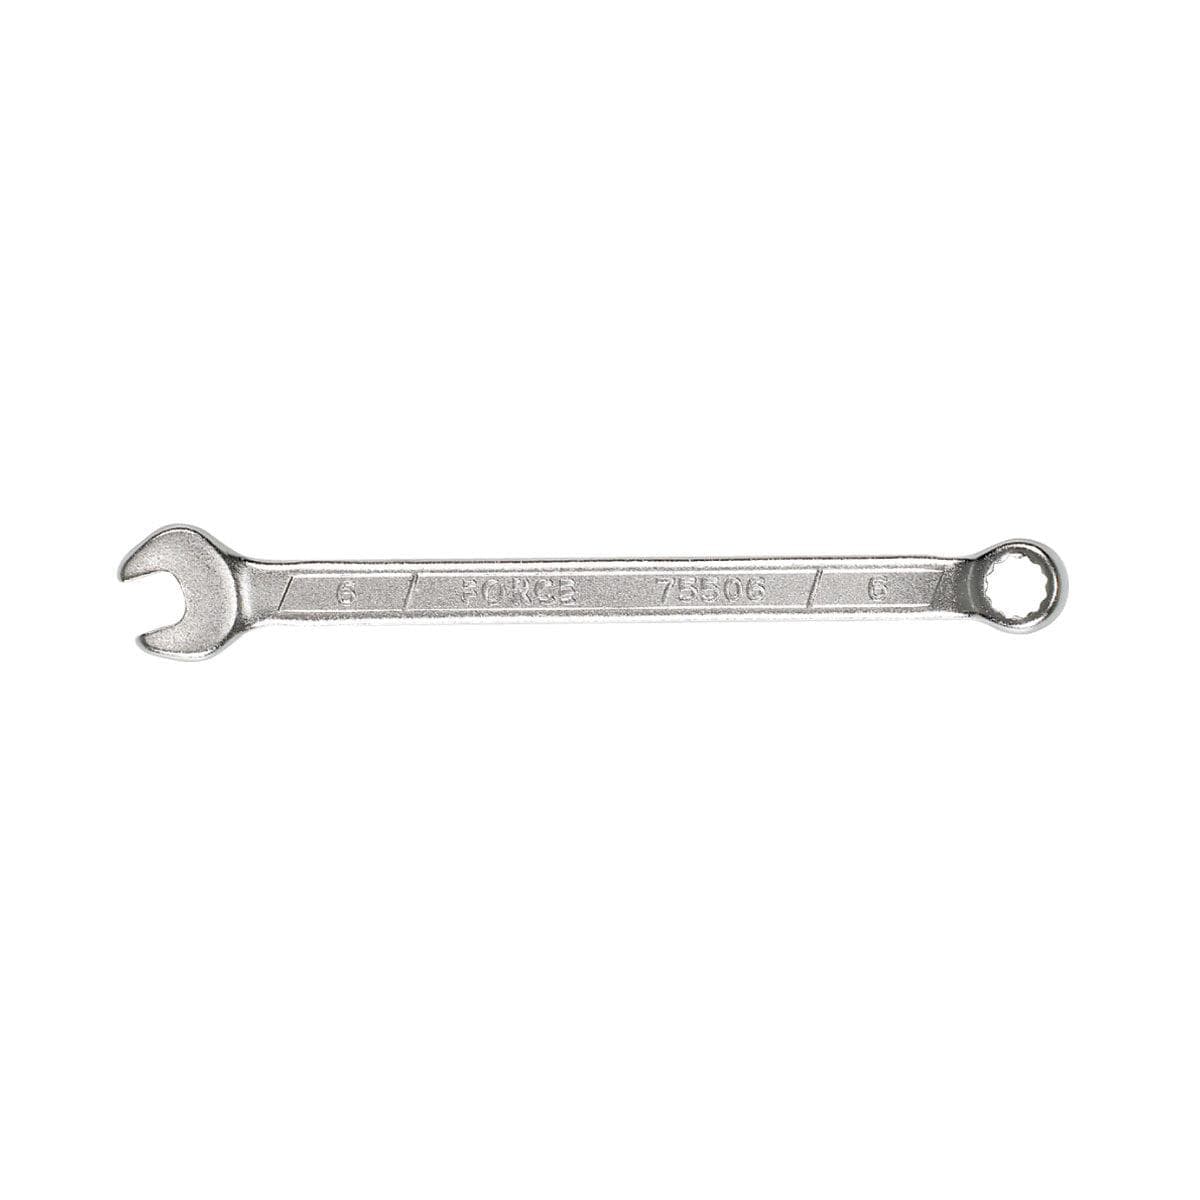 Cyclo 24Mm Open/Ring Spanner: